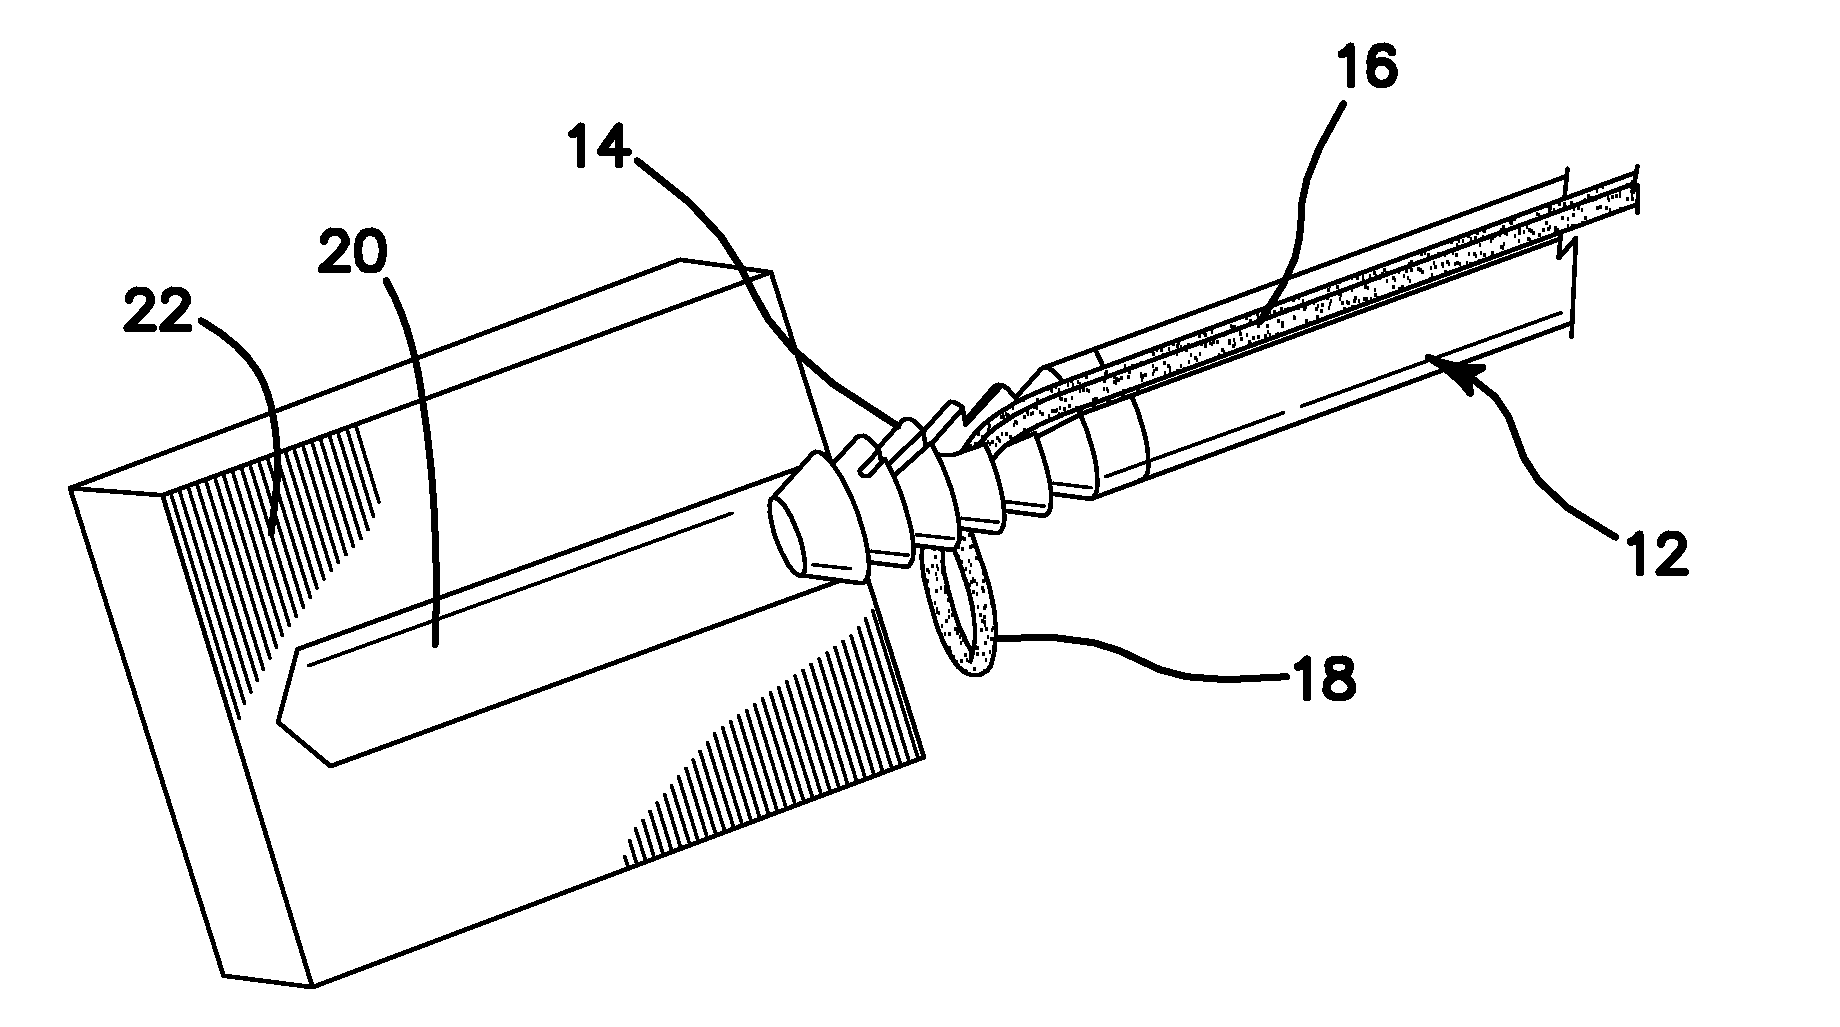 Anchors and method for securing suture to bone